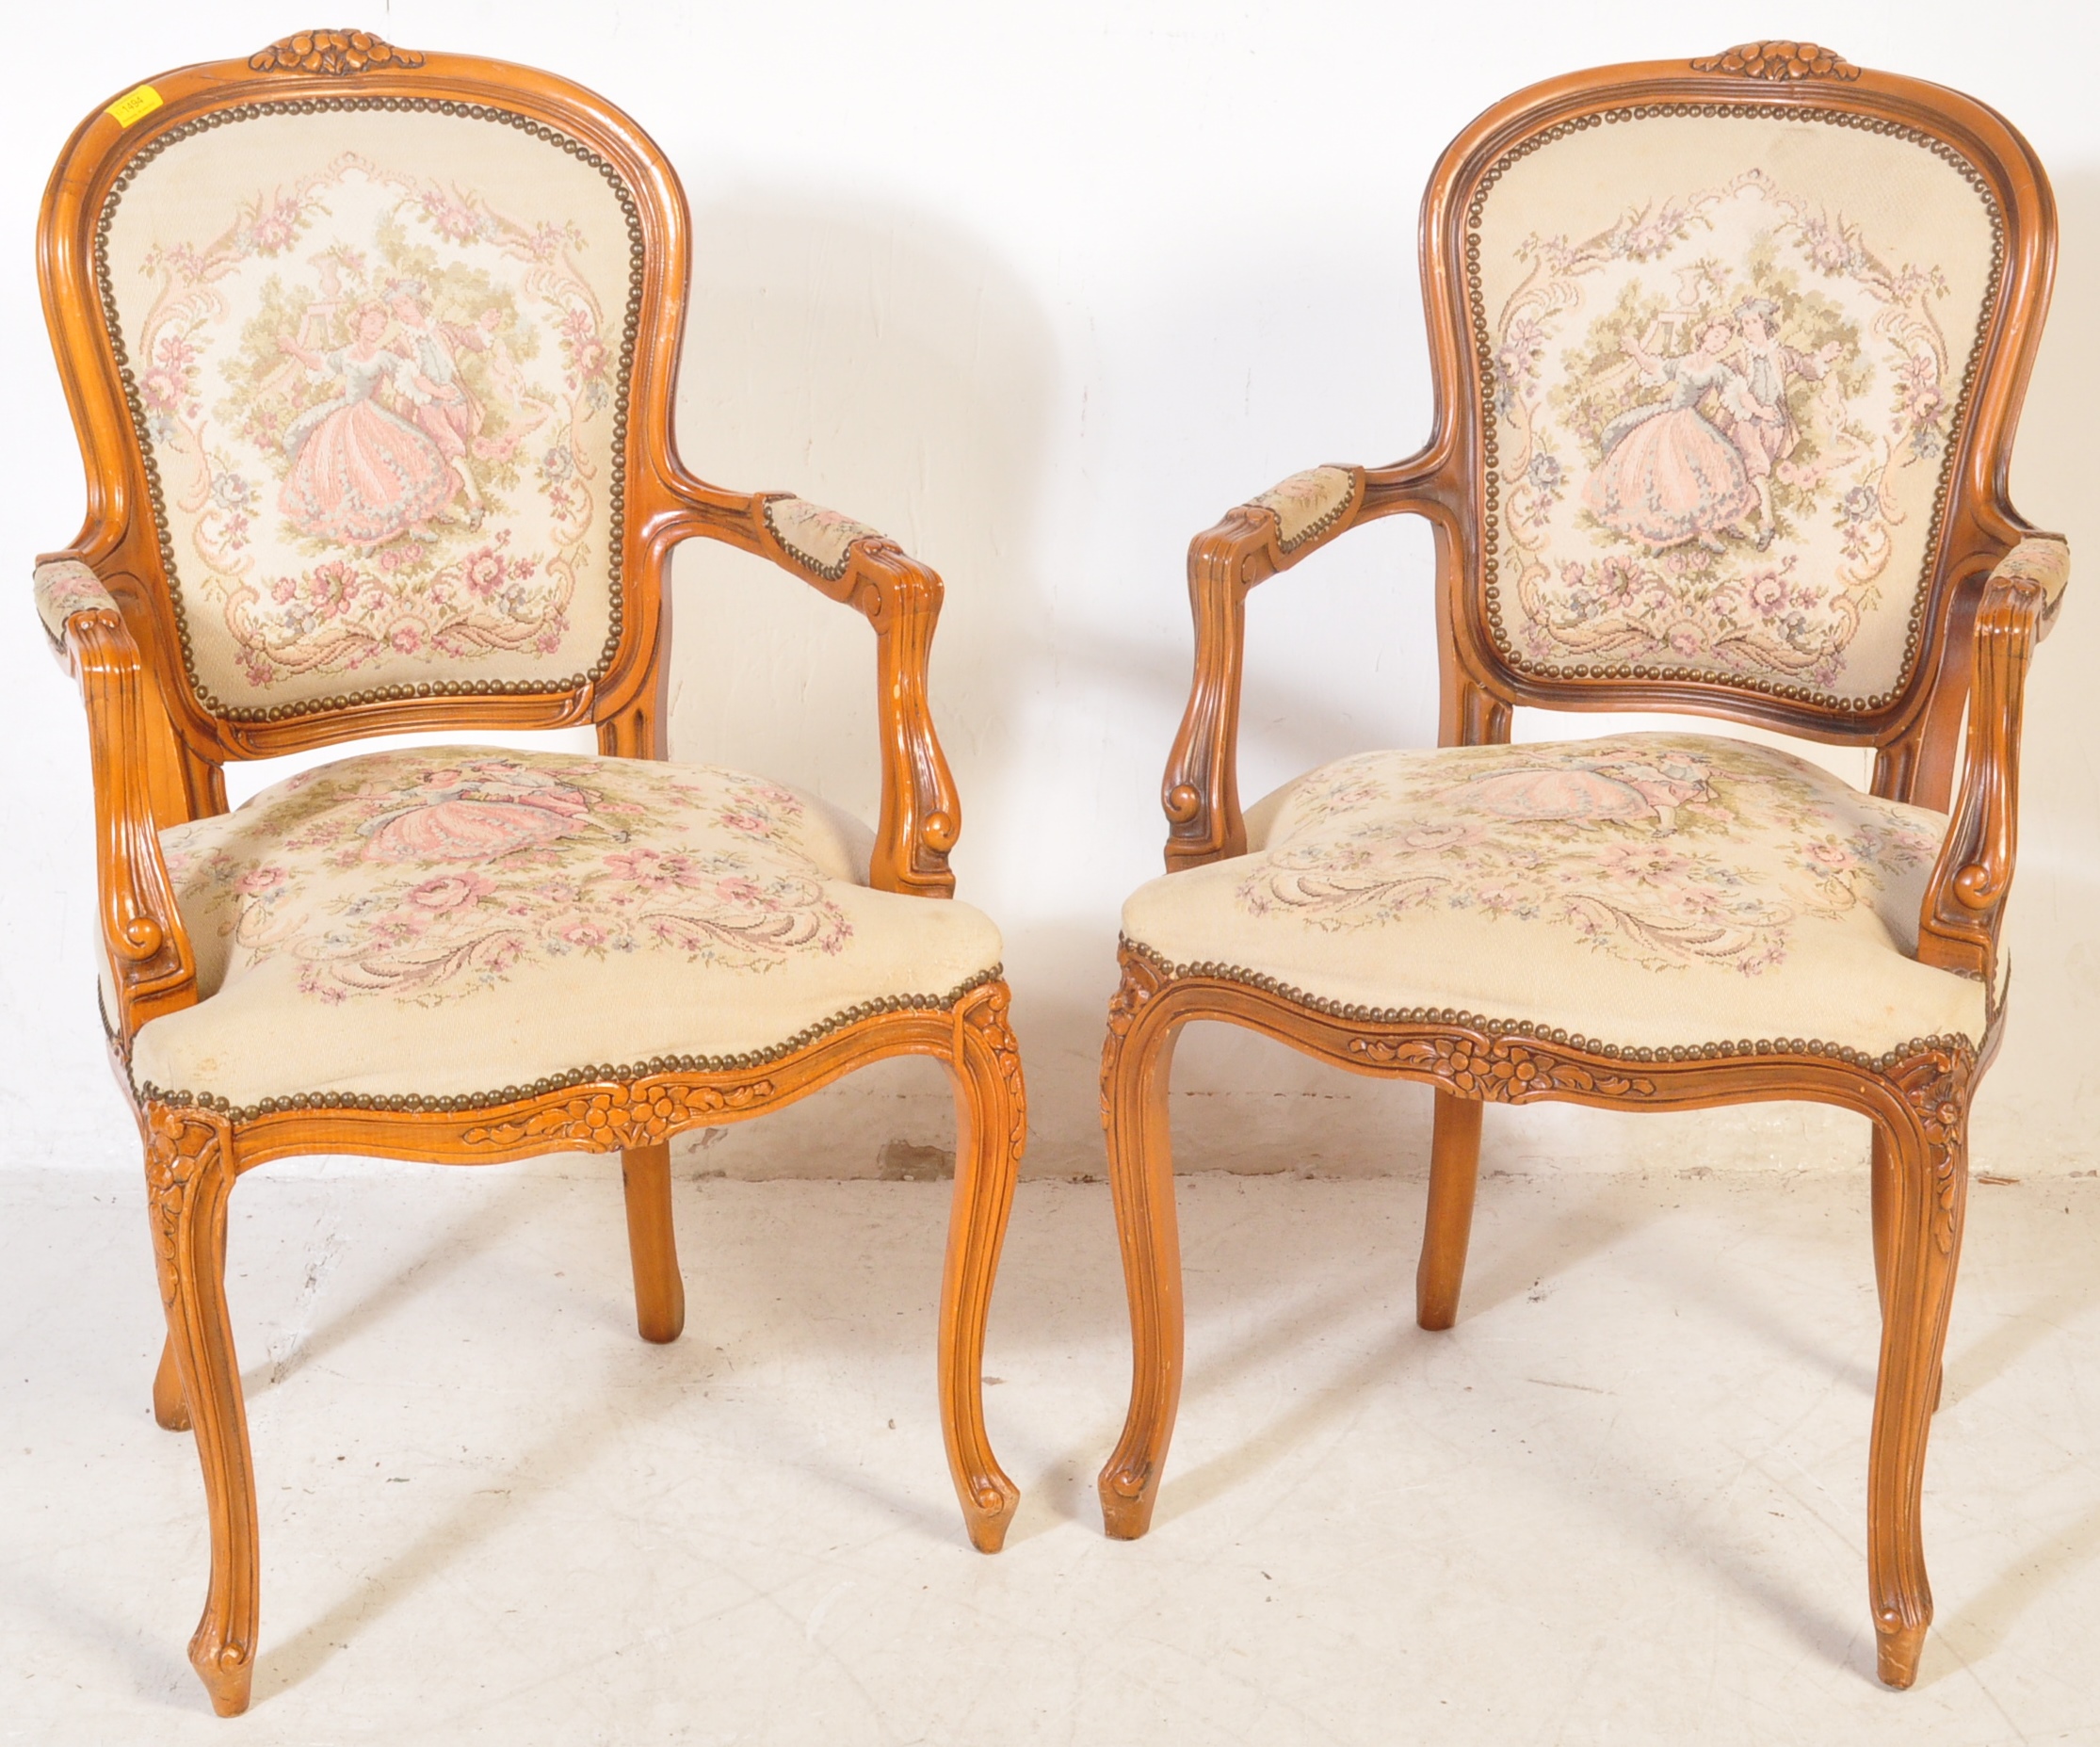 PAIR OF LOUIS XVI STYLE FAUTEILS ARMCHAIRS - Image 2 of 6